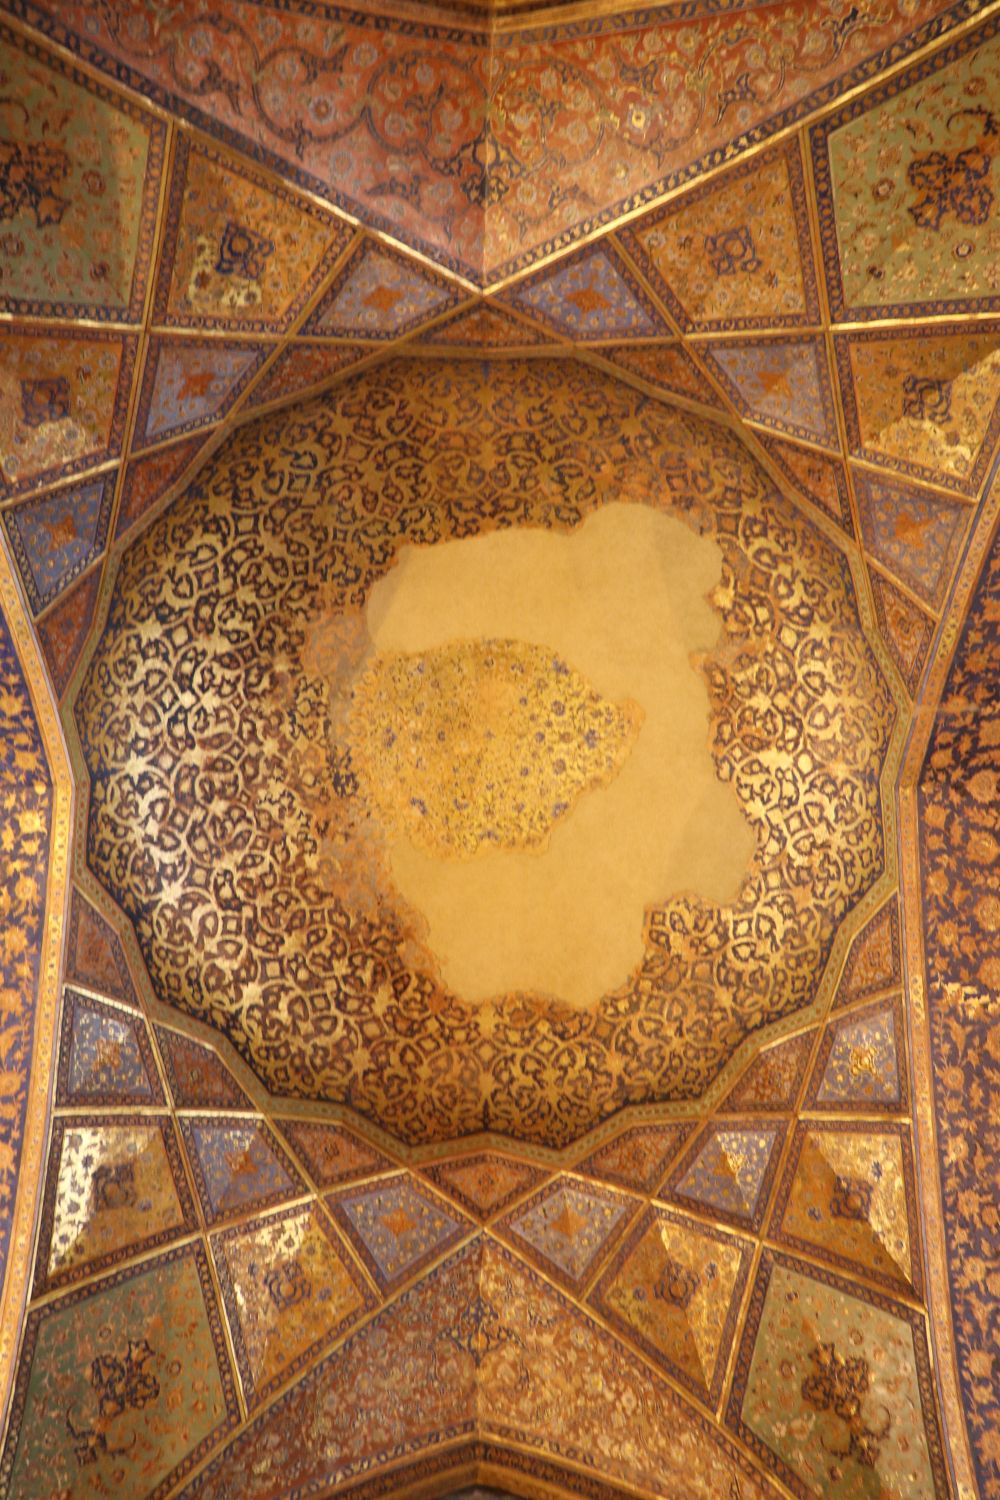 Ceiling of hall.